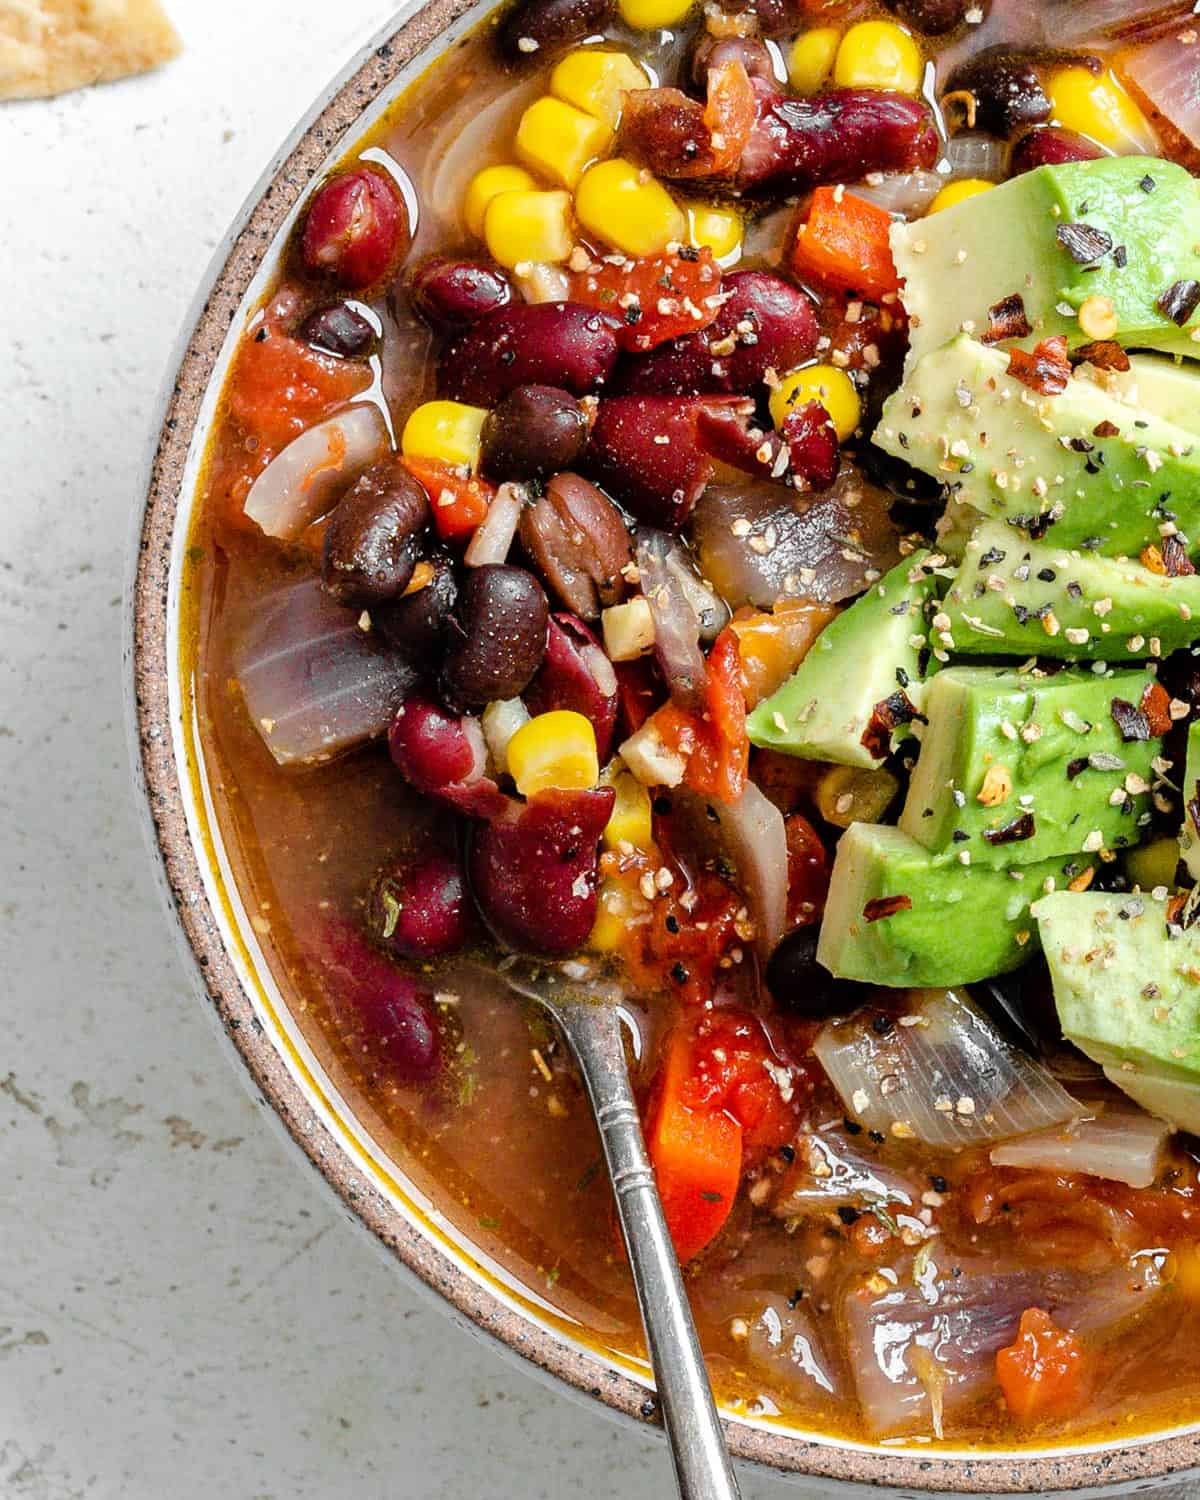 completed Quick Mexican Bean Soup [Stove + Crockpot] in a bowl against a light background